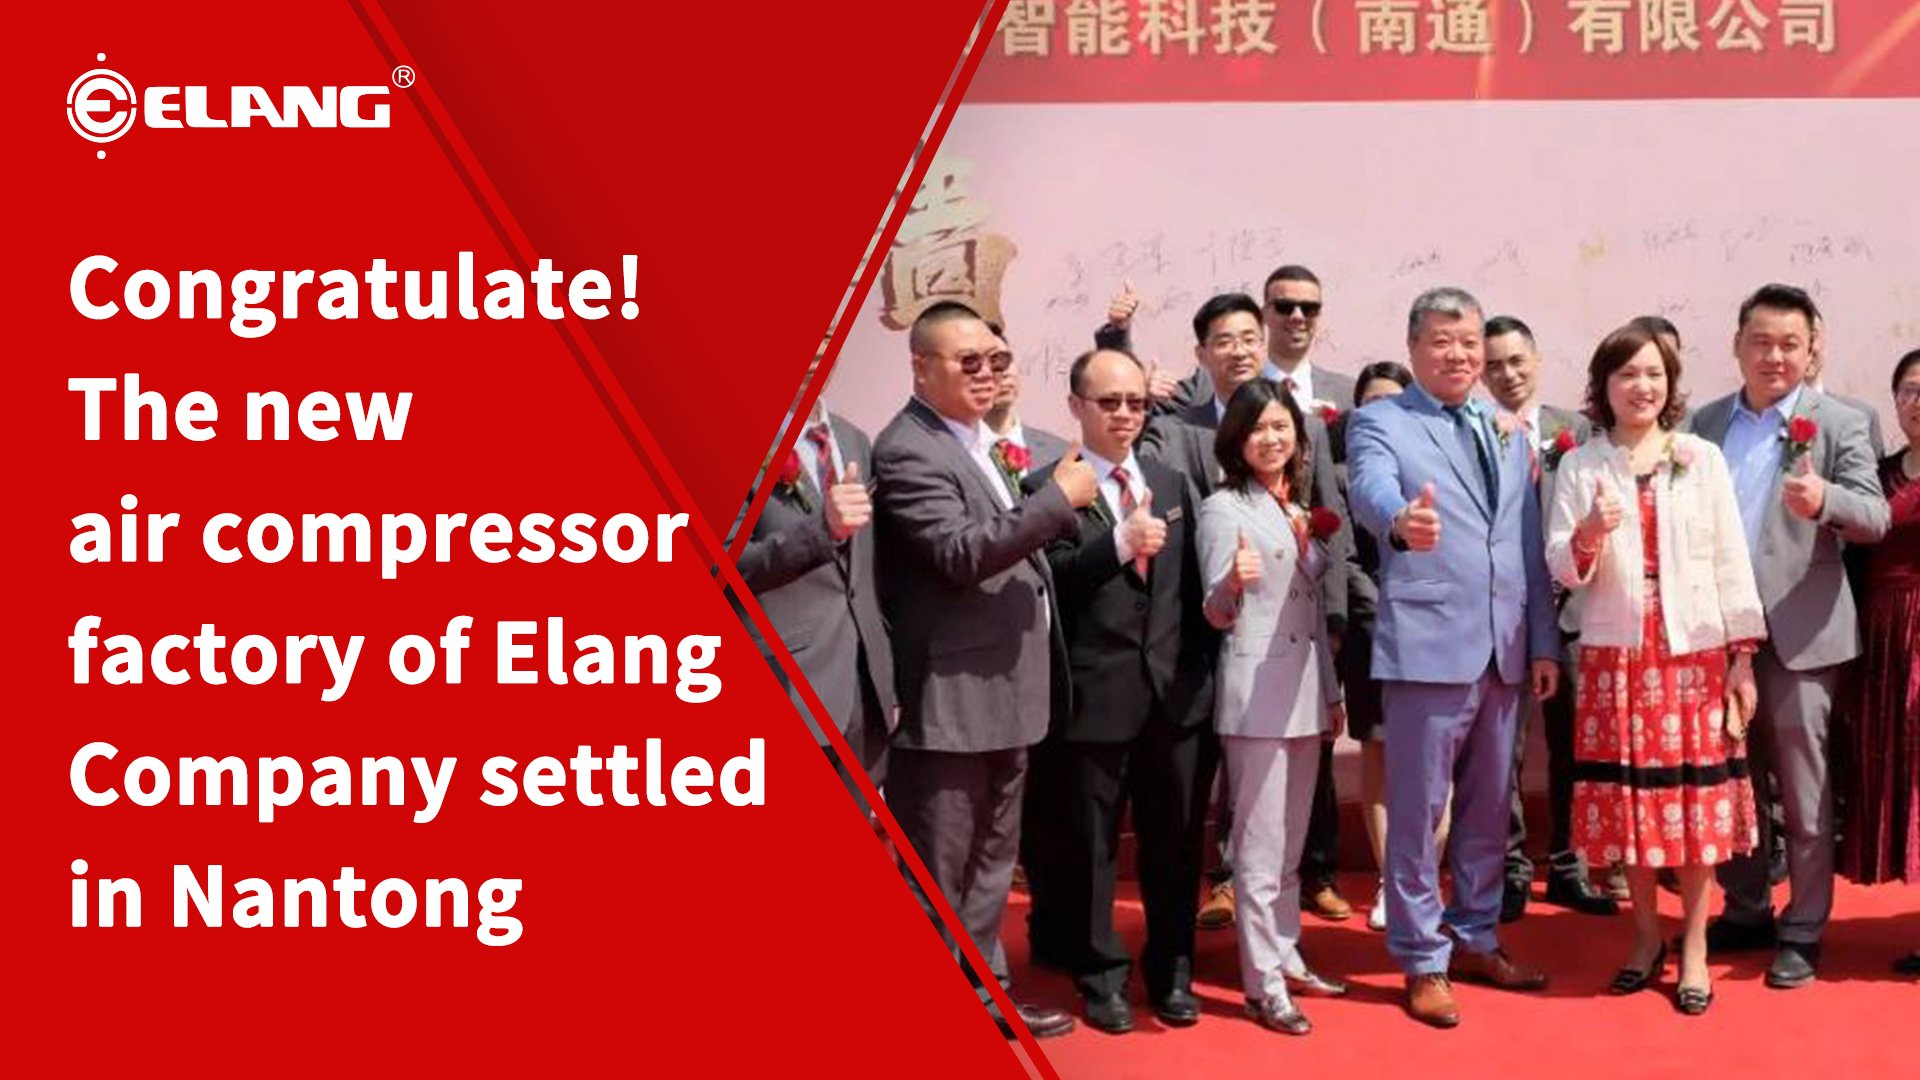 Congratulate! The new air compressor factory of Elang Company settled in Nantong.